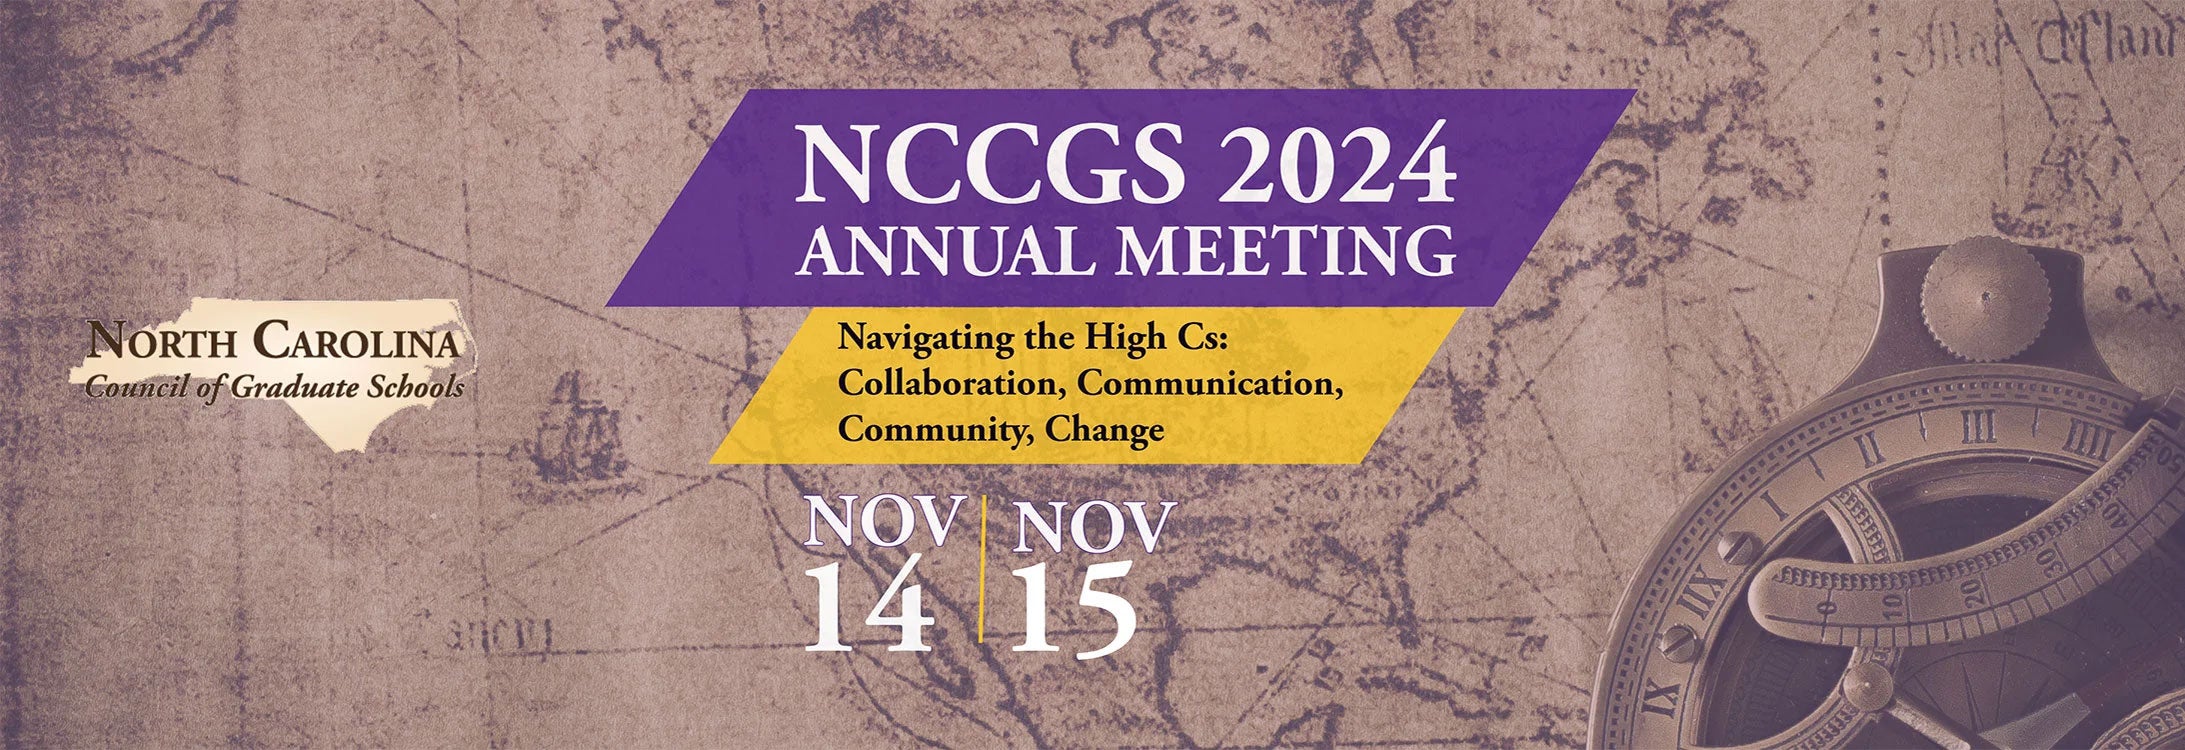 NCCGS 2024 Annual Meeting; Navigating the High C's: Collaboration, Communication, Community, Change. November 14 – 15.